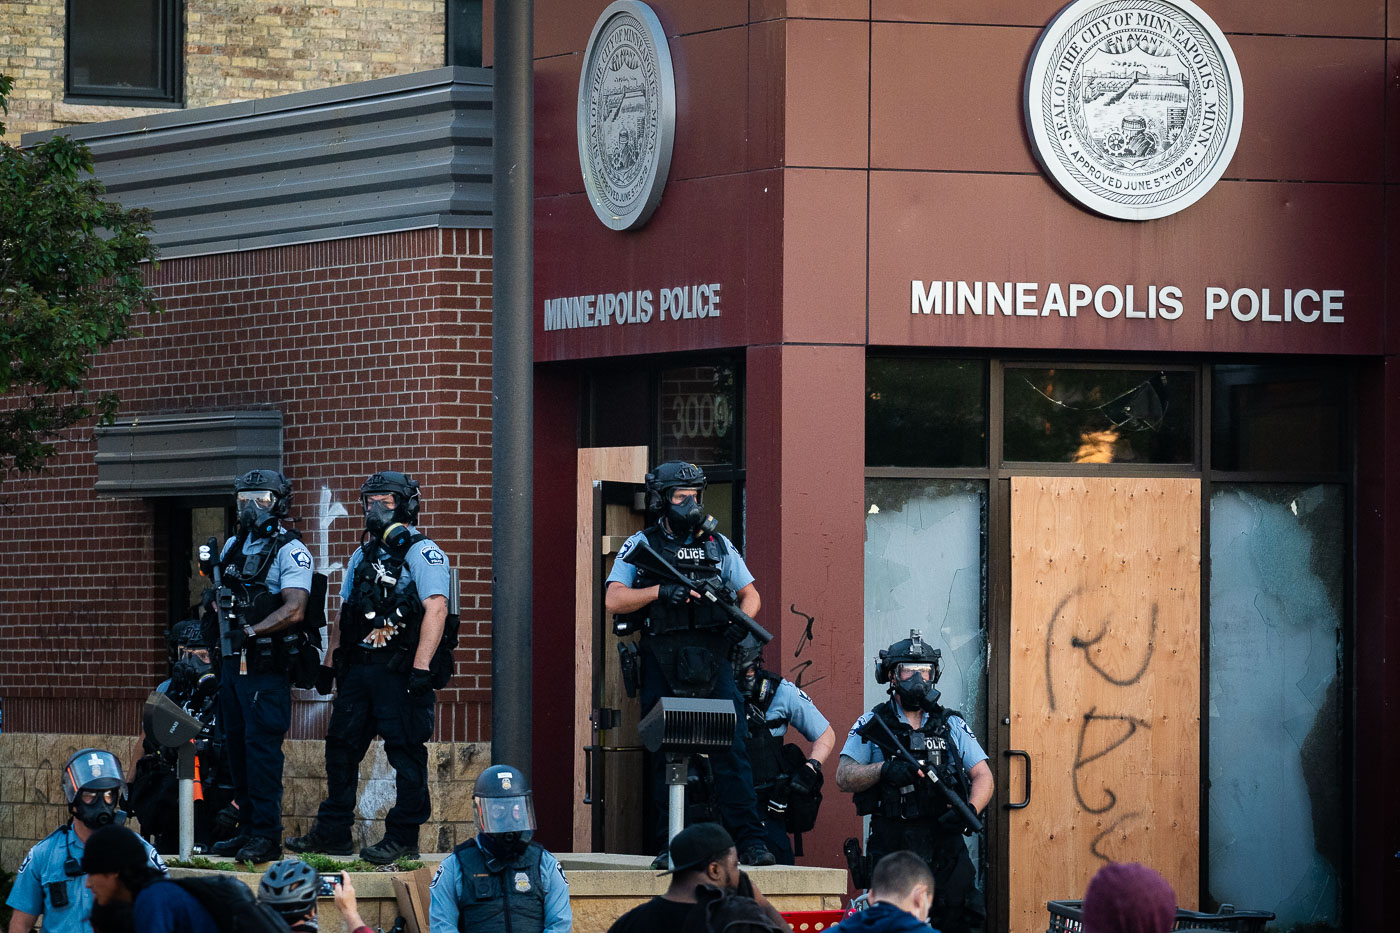 Minneapolis police and protesters in Minneapolis